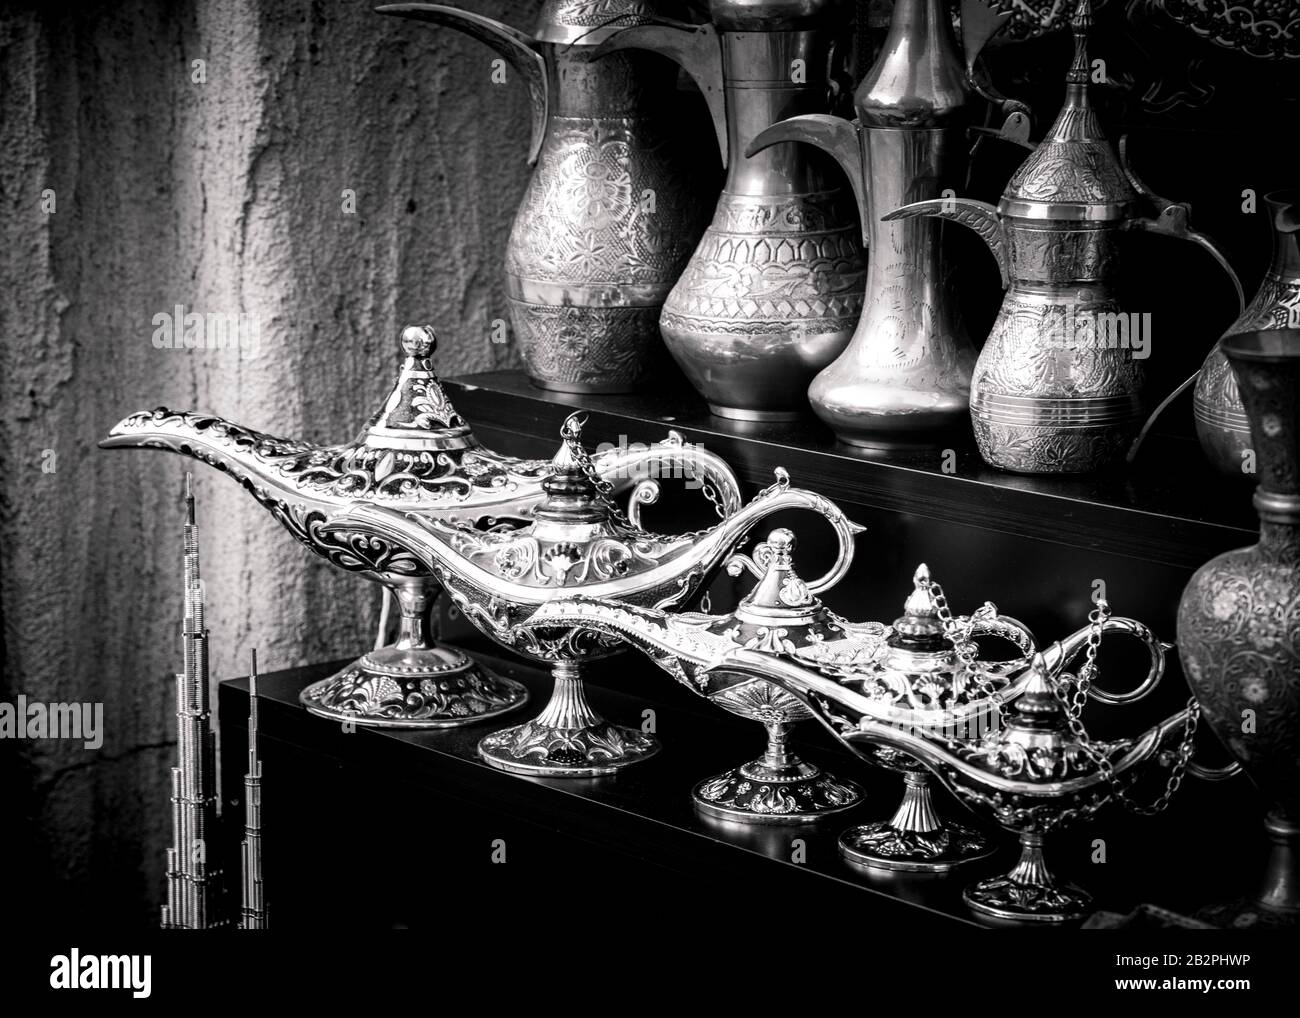 Black and white close up of magic lamps and tradition Arabian style coffee pots. Stock Photo